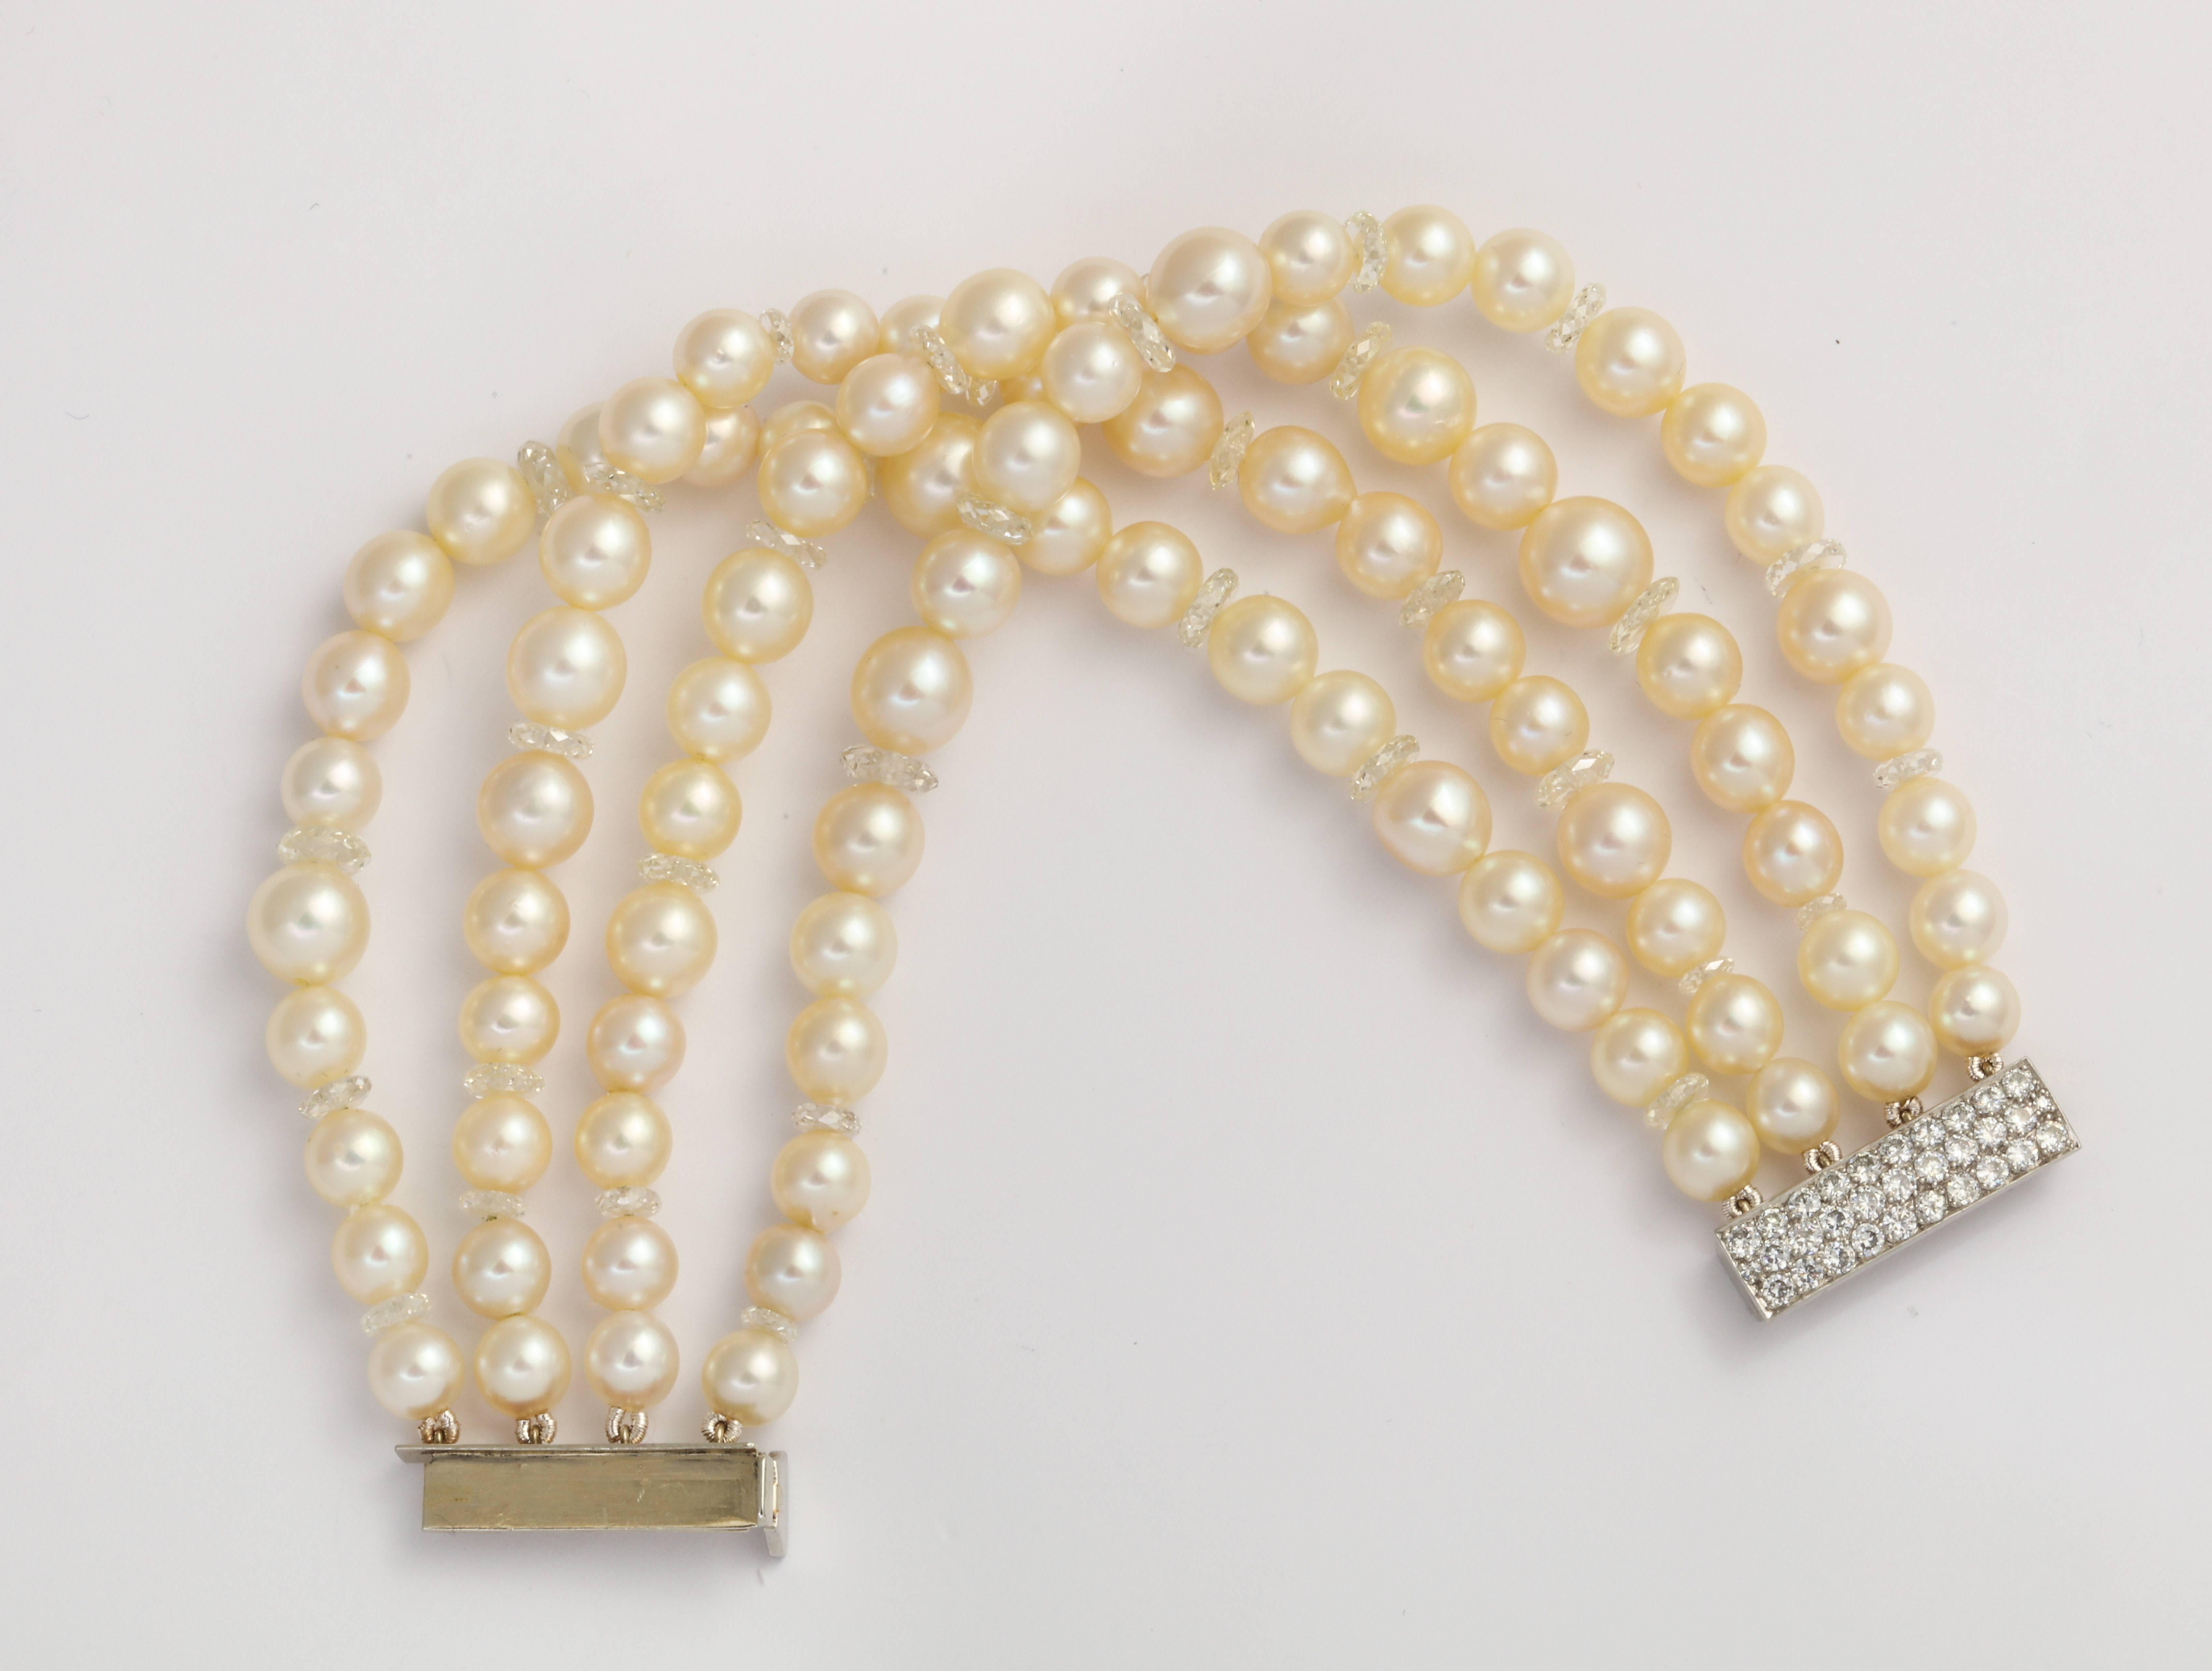 A 4-row bracelet featuring cultured pearls, interspersed with disc shaped diamonds weighing a total of 19.5 carats. Set with an 18 karat white gold and diamond clasp with a total diamond weight of 1.45 carats estimated. The pearls range in size,